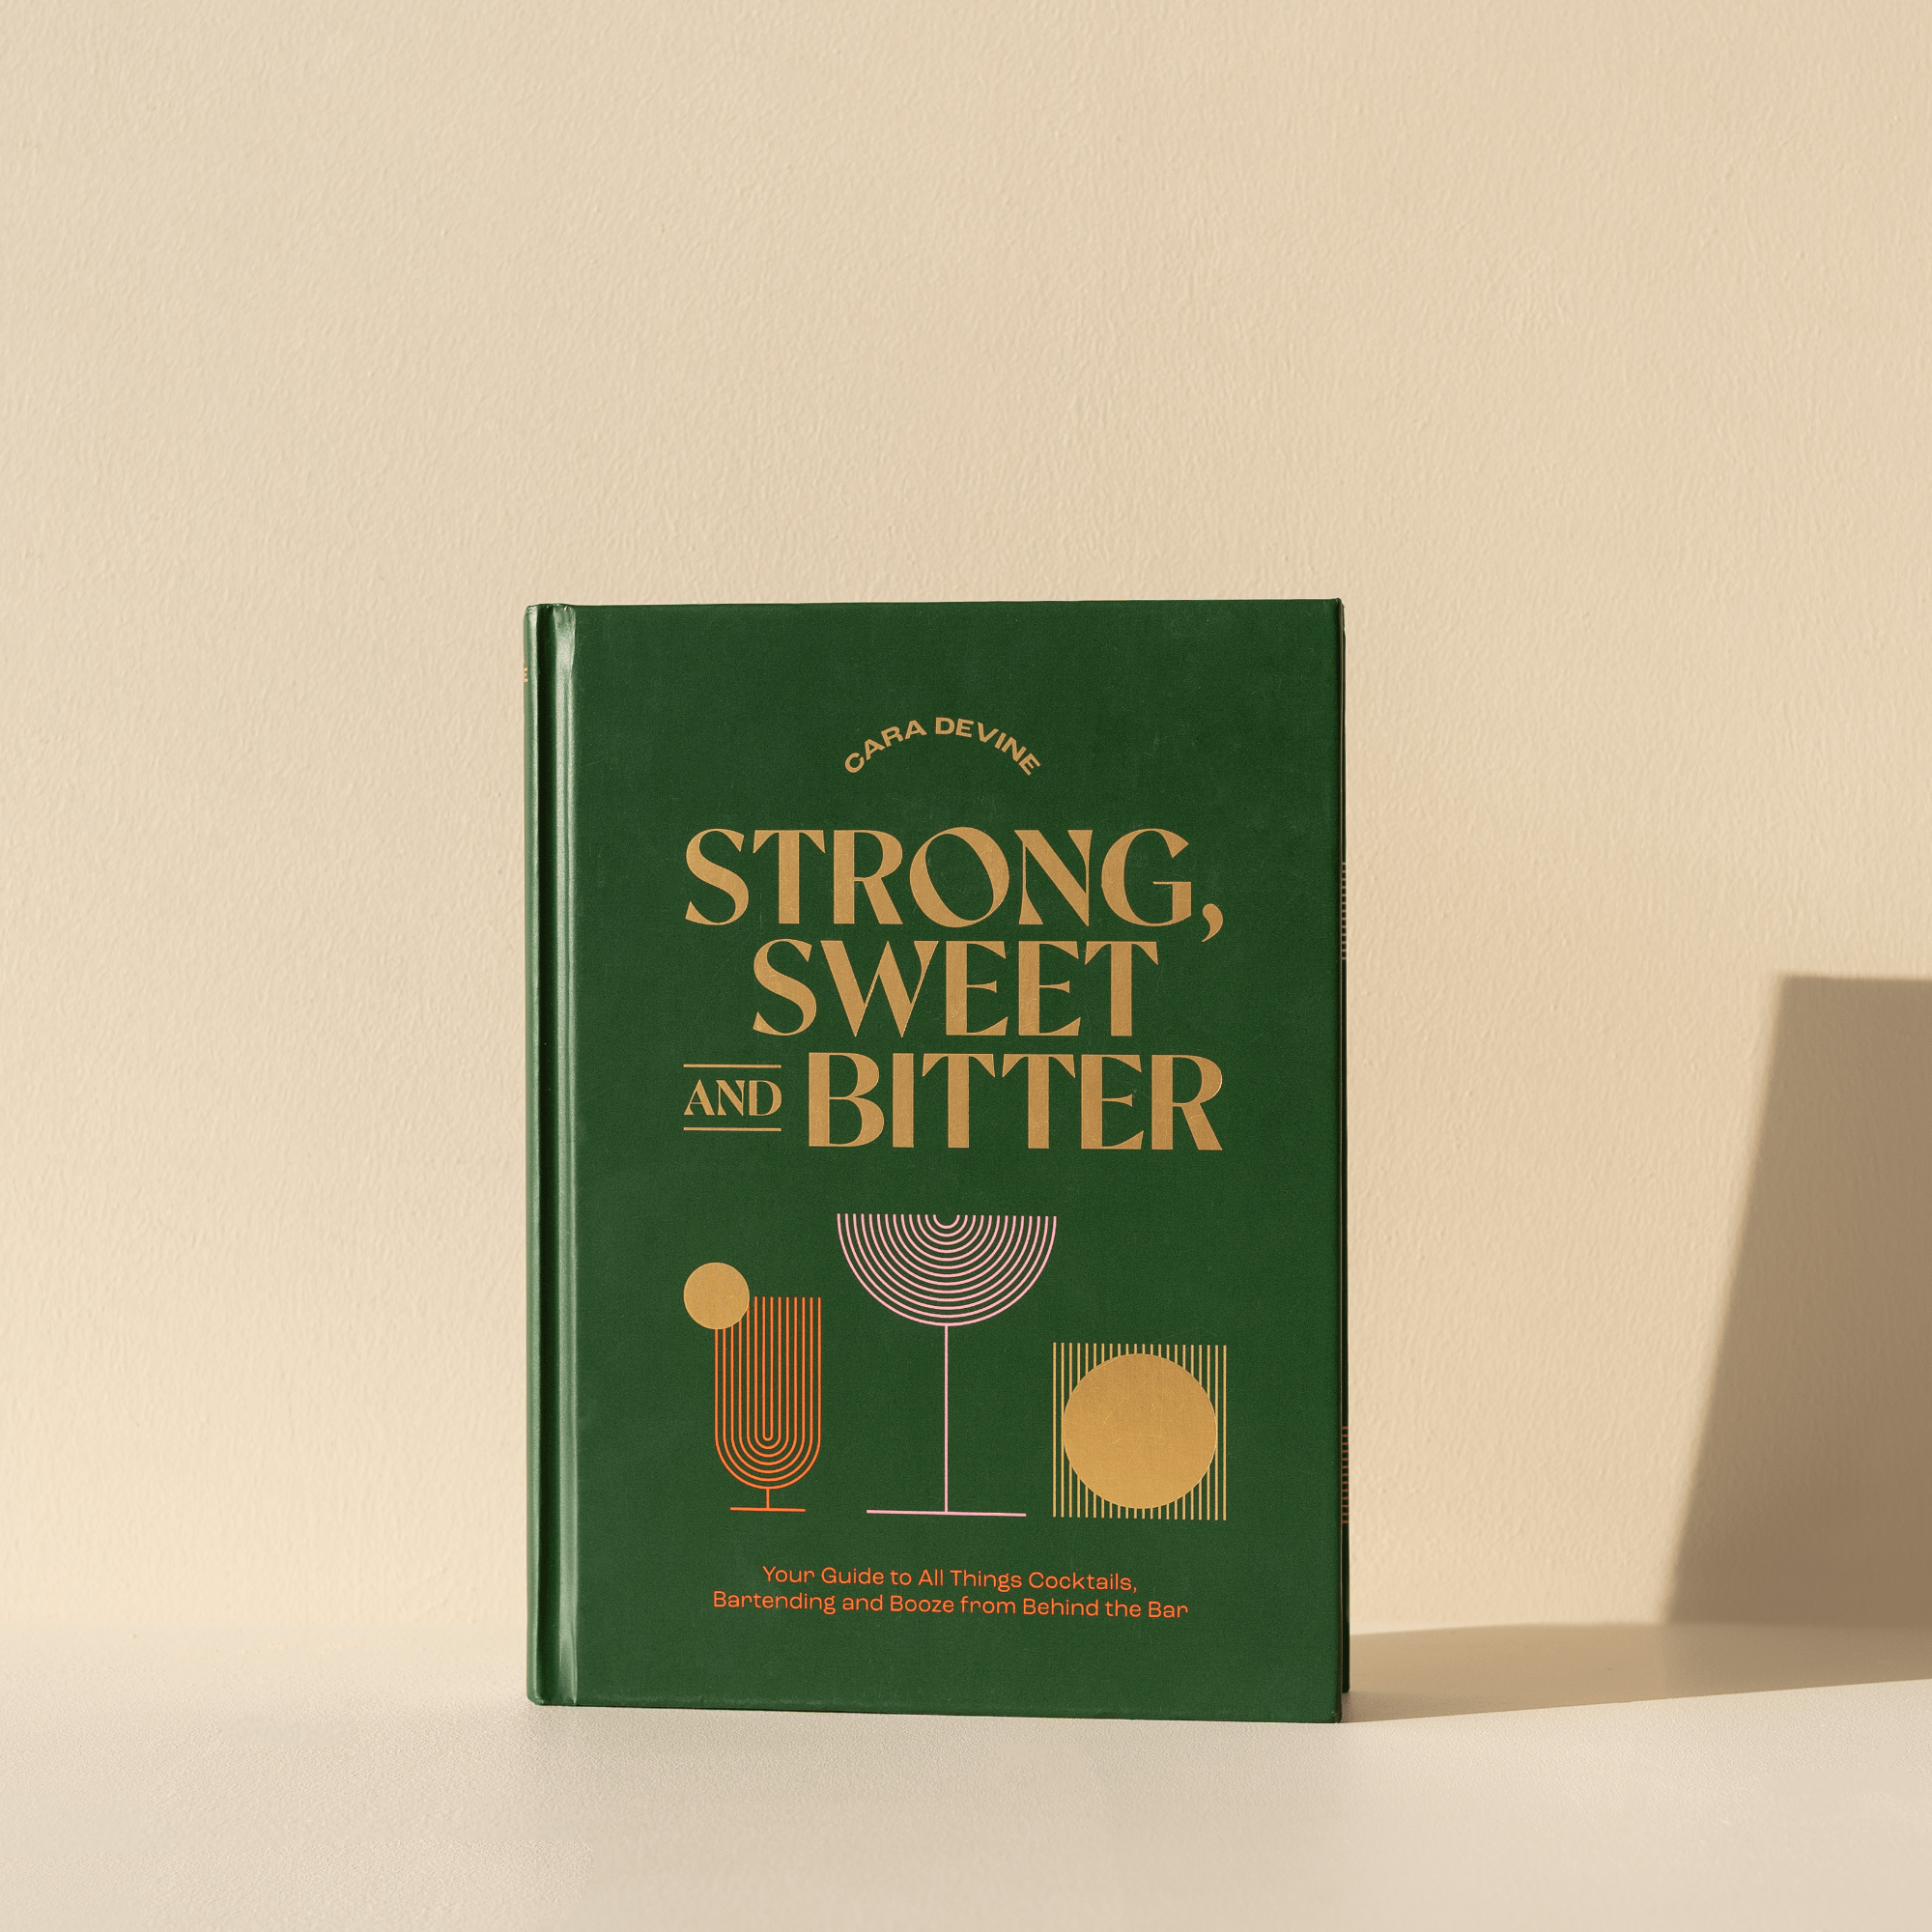 Featuring our Strong, Sweet and Bitter cocktail book written by Cara Devine